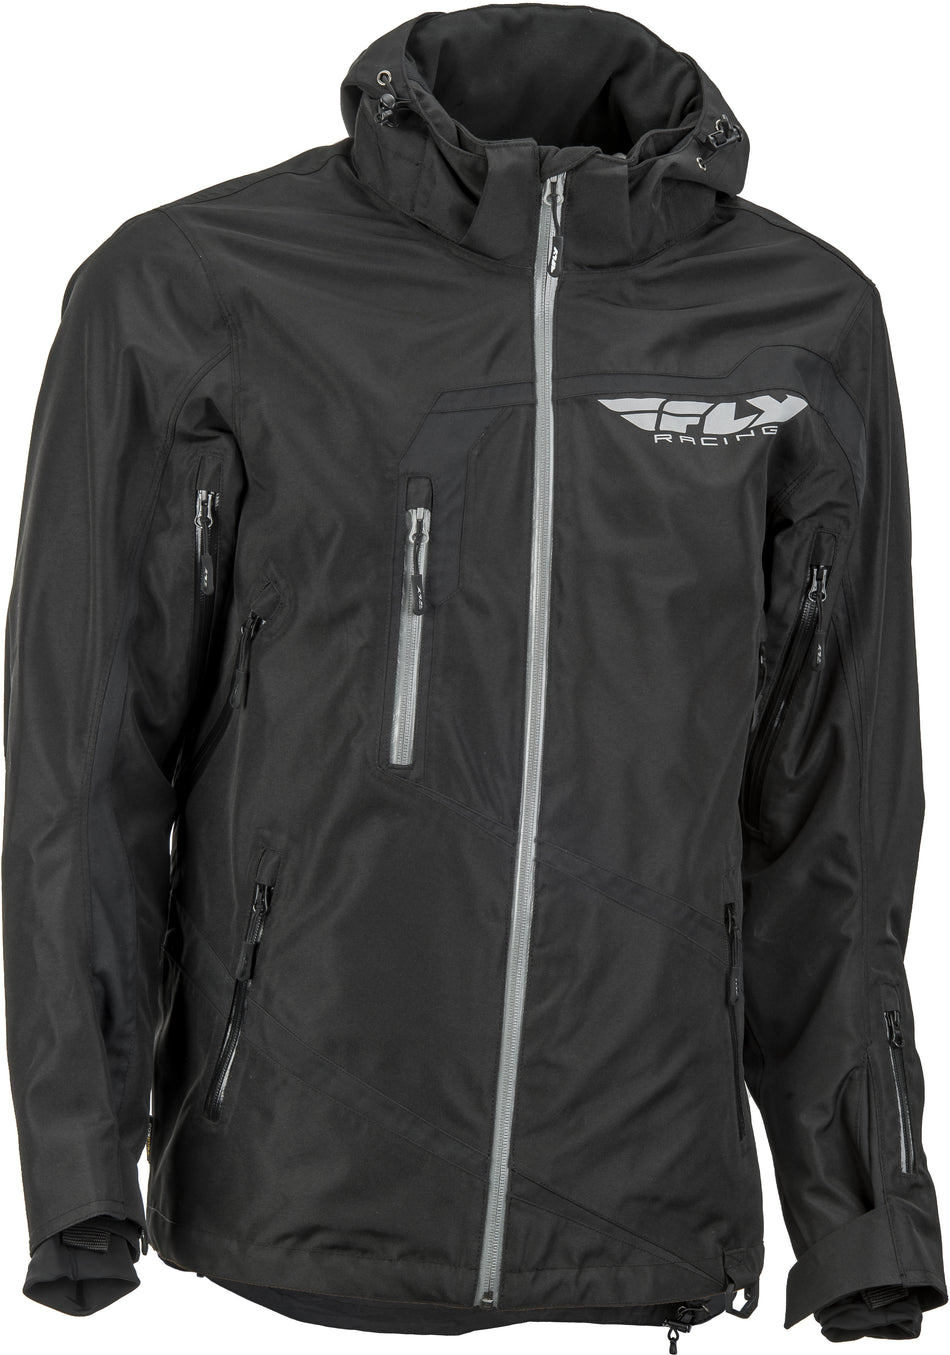 FLY RACING Fly Carbon Jacket Black Lg 470-4040L